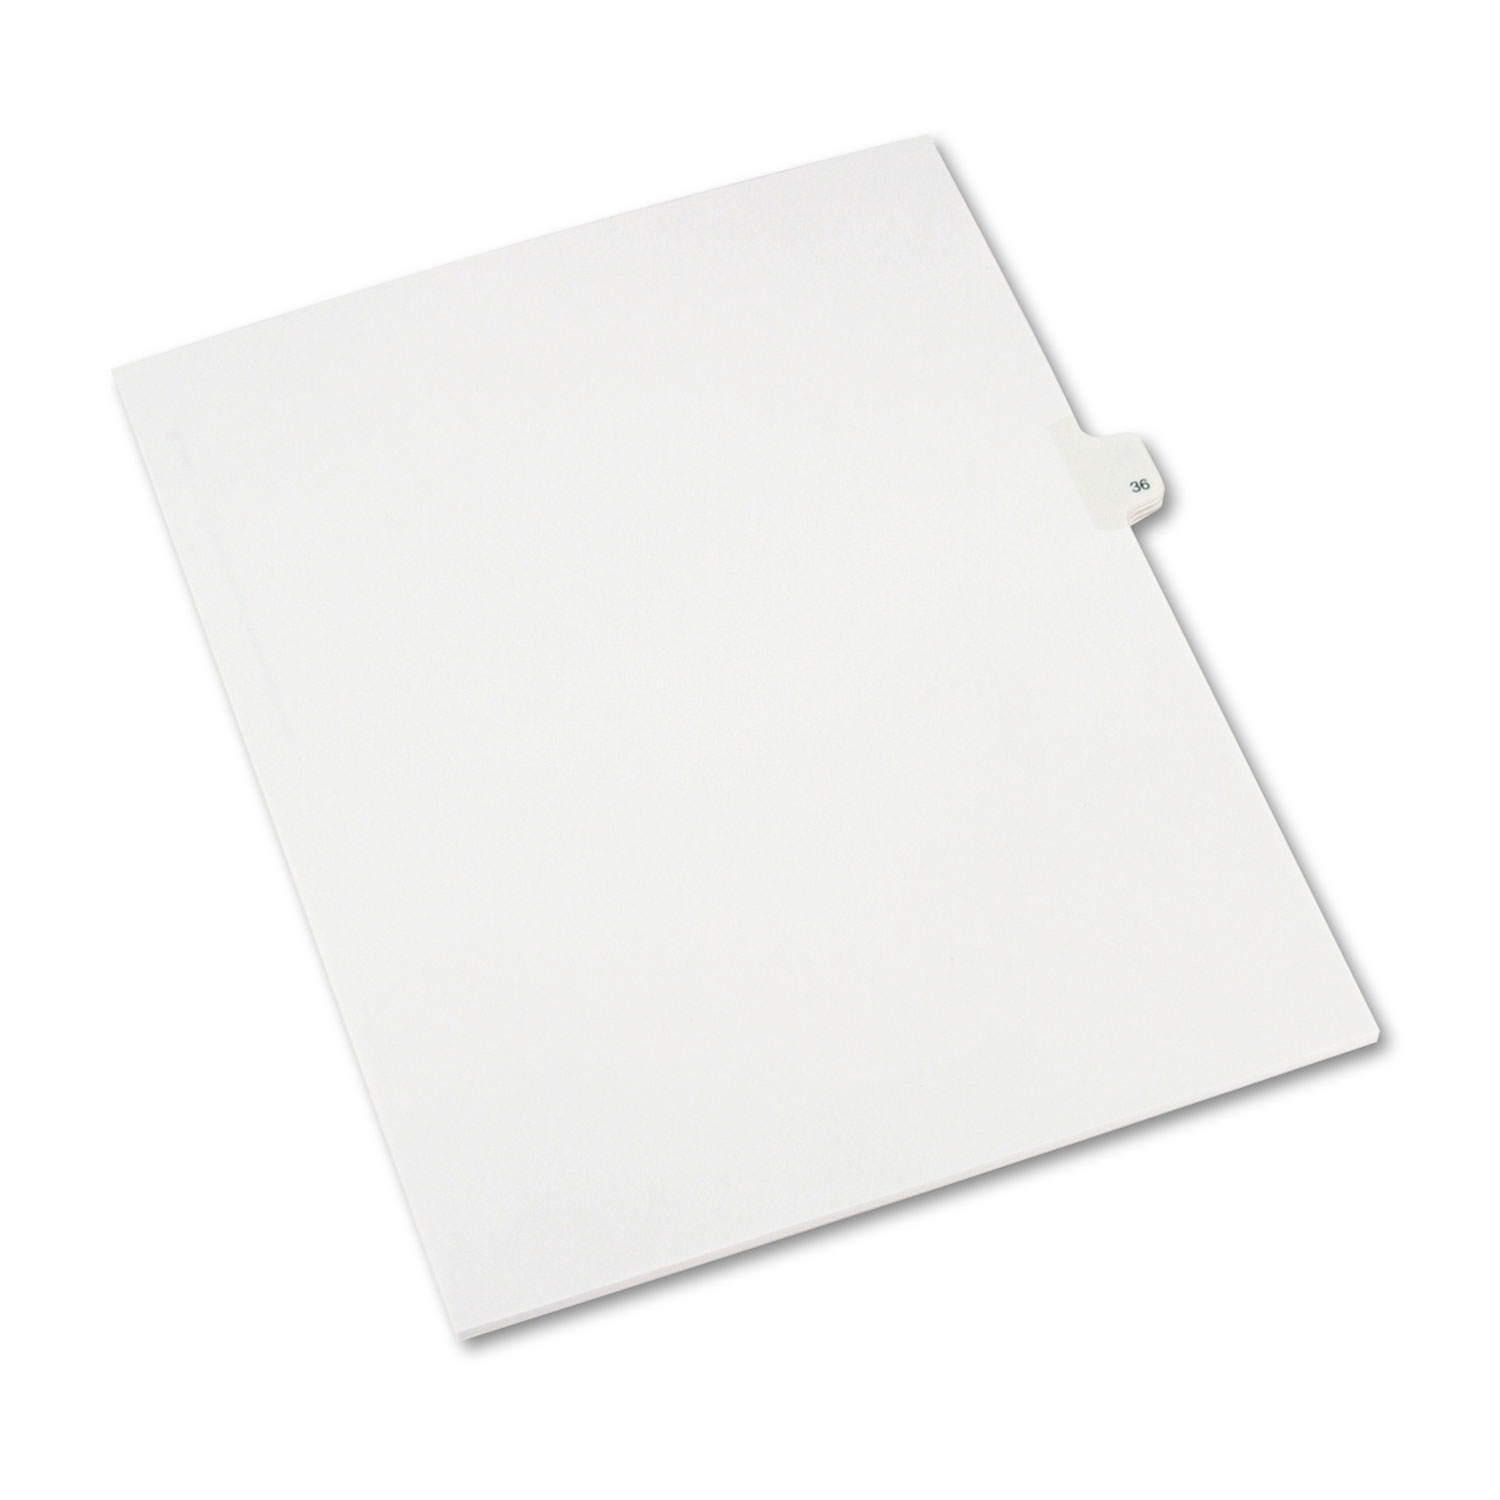 Allstate-Style Legal Exhibit Side Tab Divider, Title: 36, Letter, White, 25/Pack